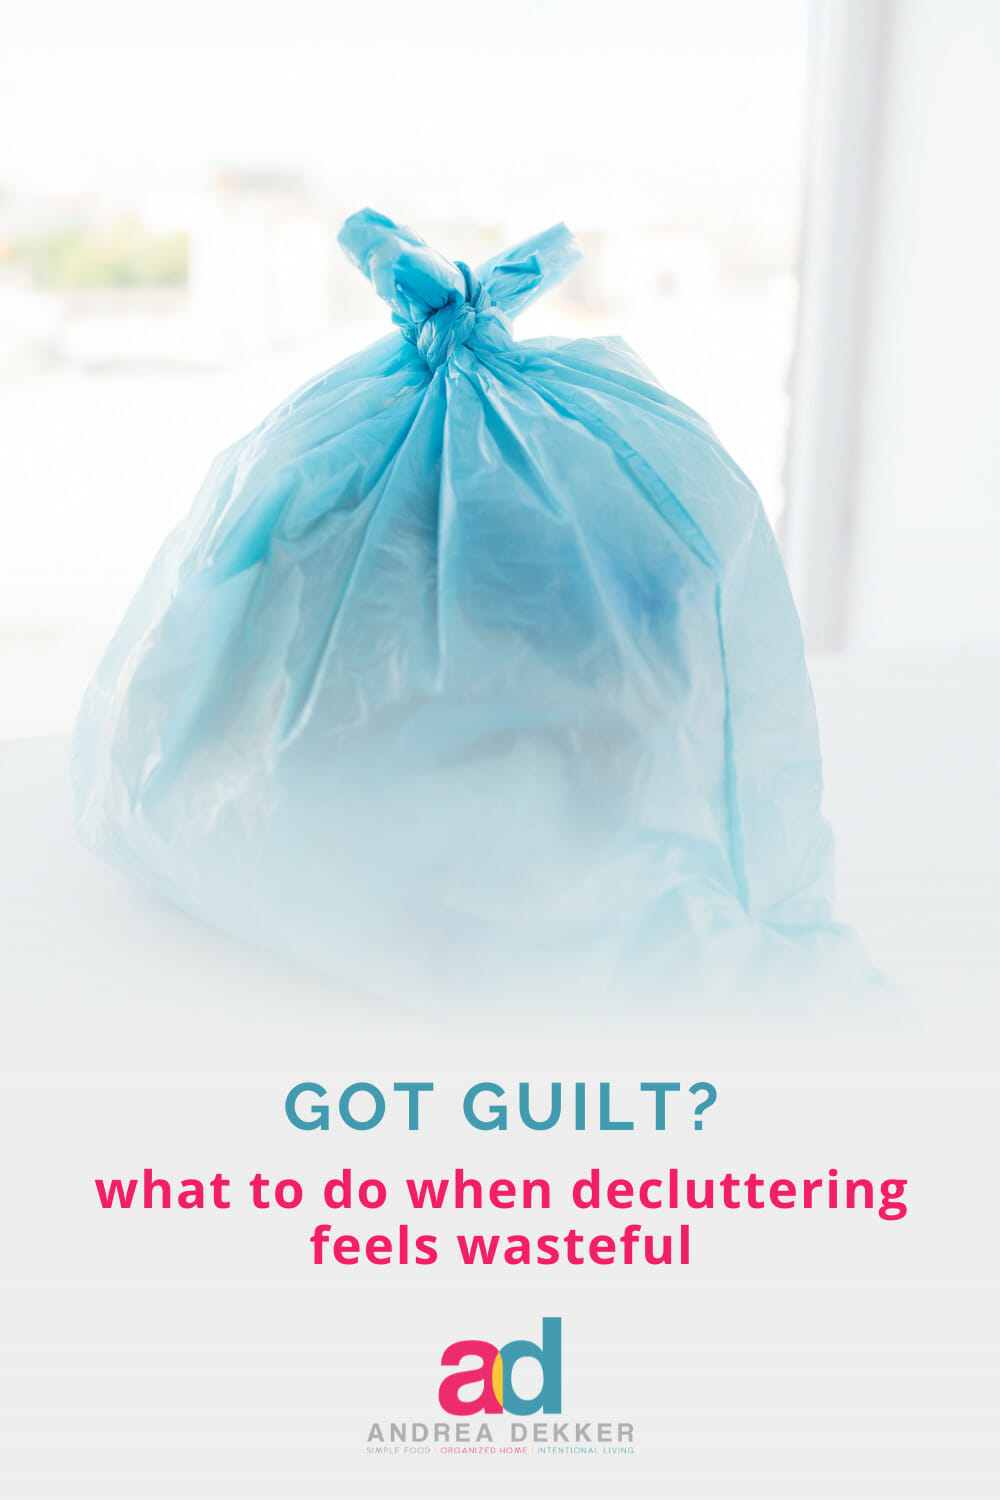 Simple solutions to declutter your home and life without being wasteful -- perfect for those who struggle with guilt or fear while decluttering! via @andreadekker